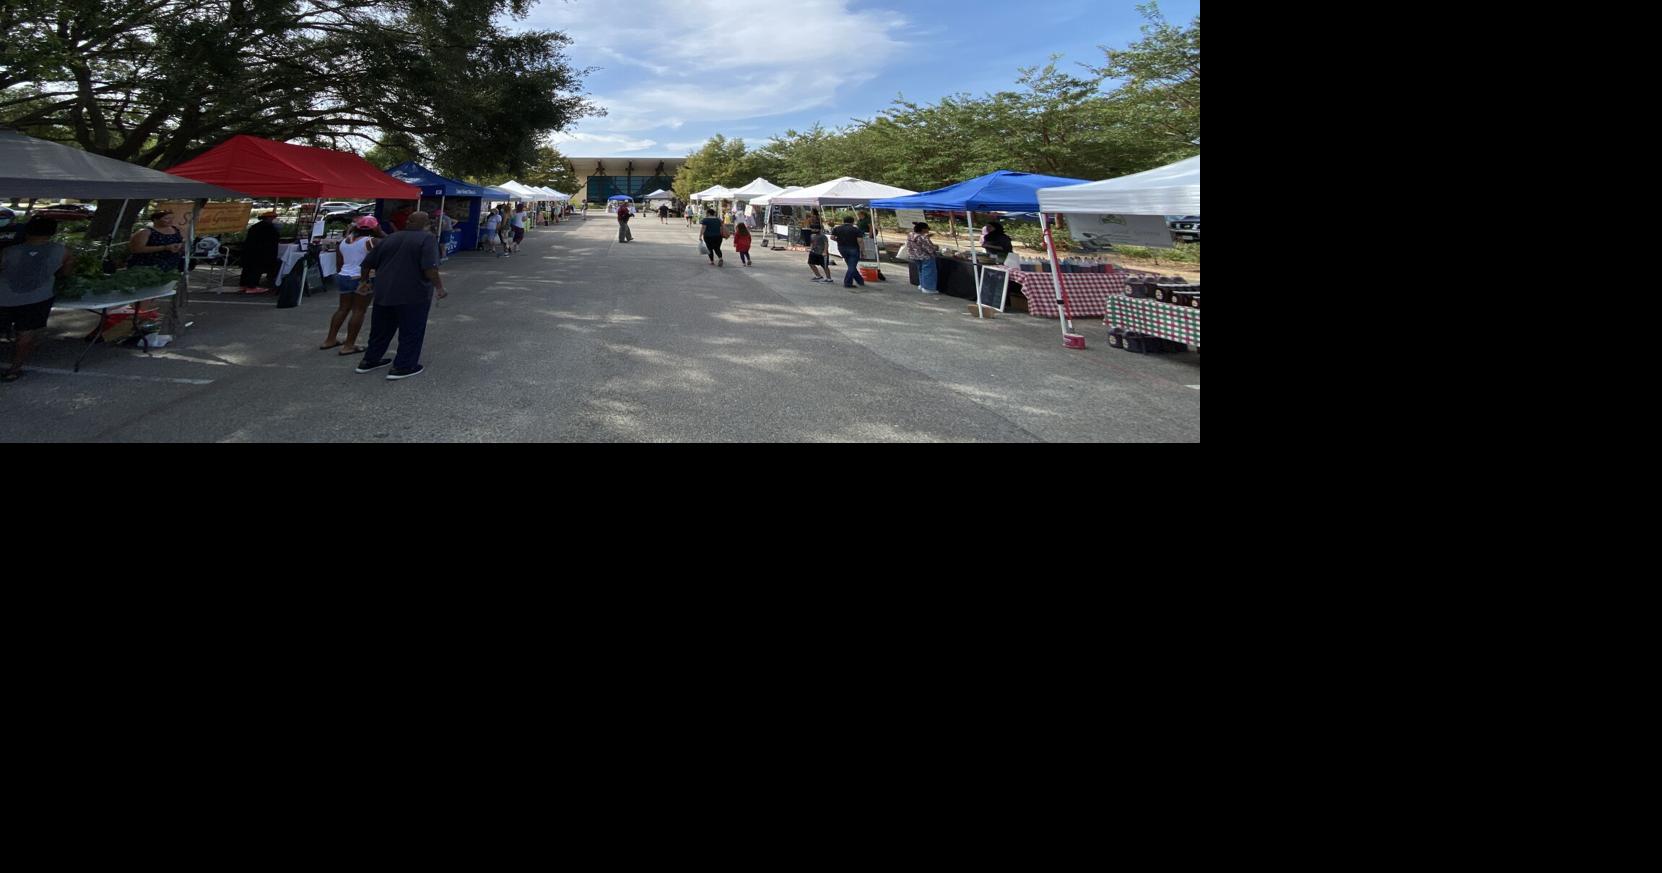 Fun in Fort Bend Imperial Farmers Market brings local flavor to